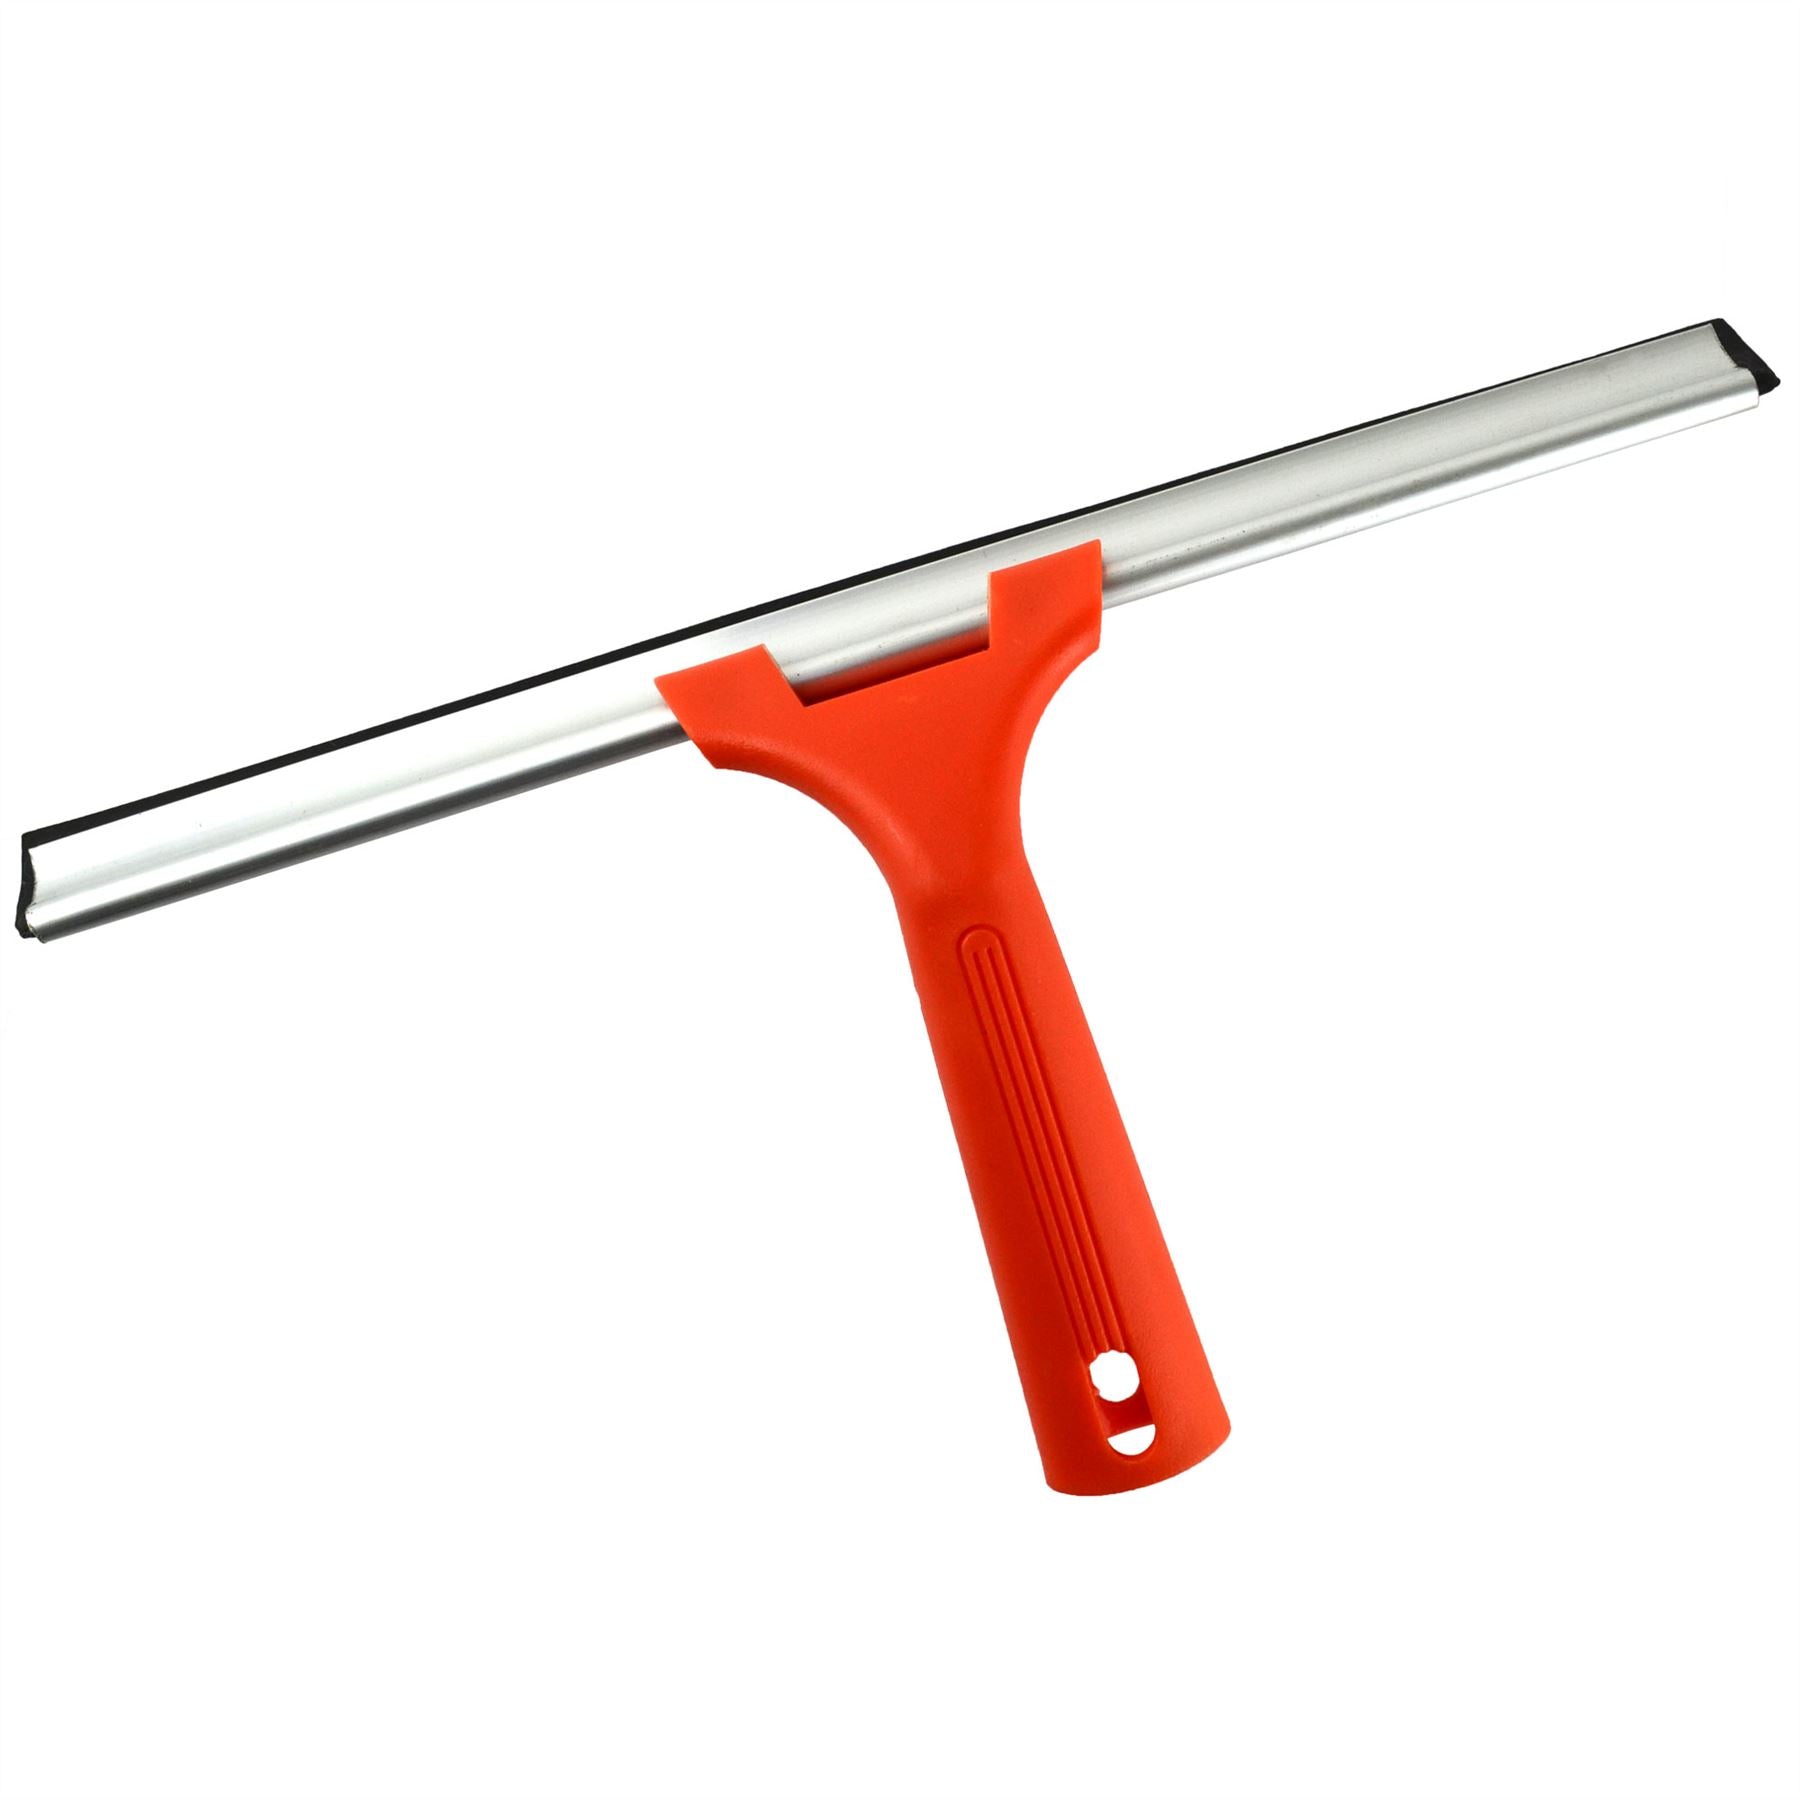 Window Squeegee Hand Held Double Blade Shower Glass Cleaner Smear Orange Sil244